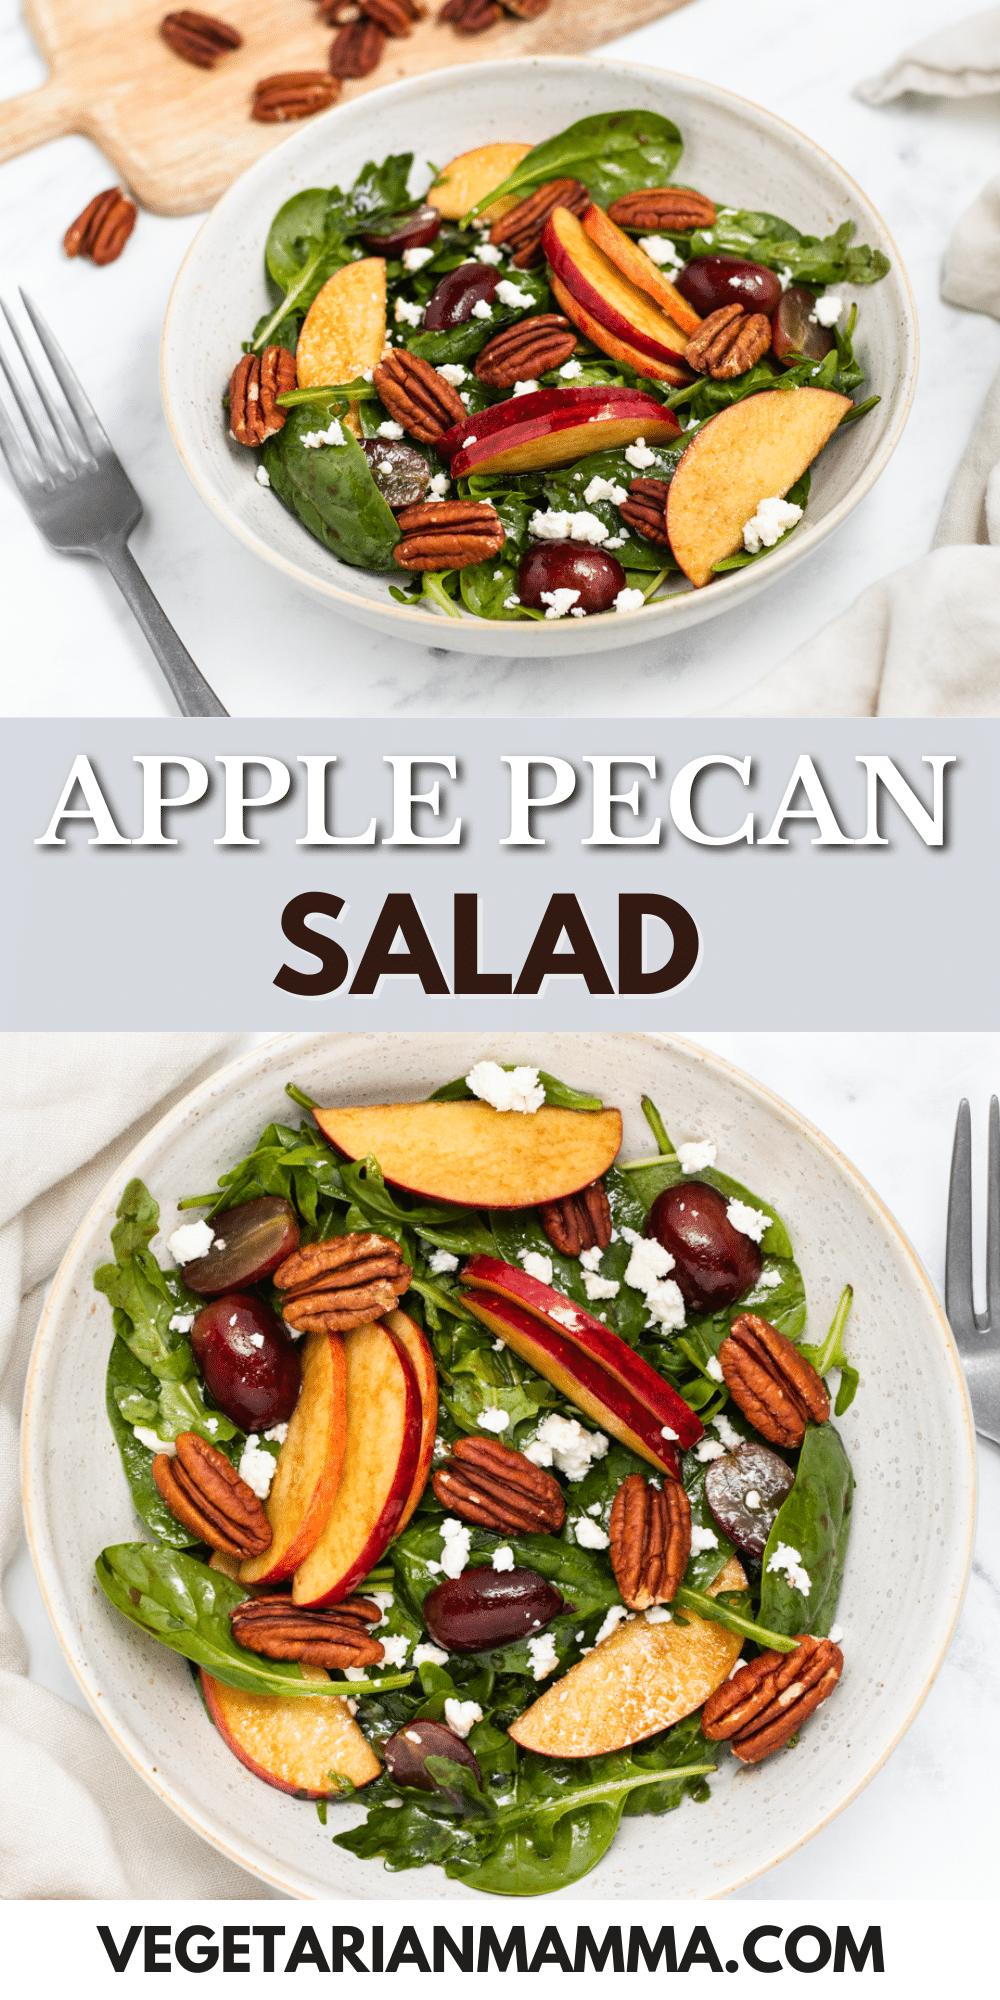 This Apple Pecan Salad is a healthy side, topped with crisp apples, toasted pecans, salty feta, and a simple homemade dressing.